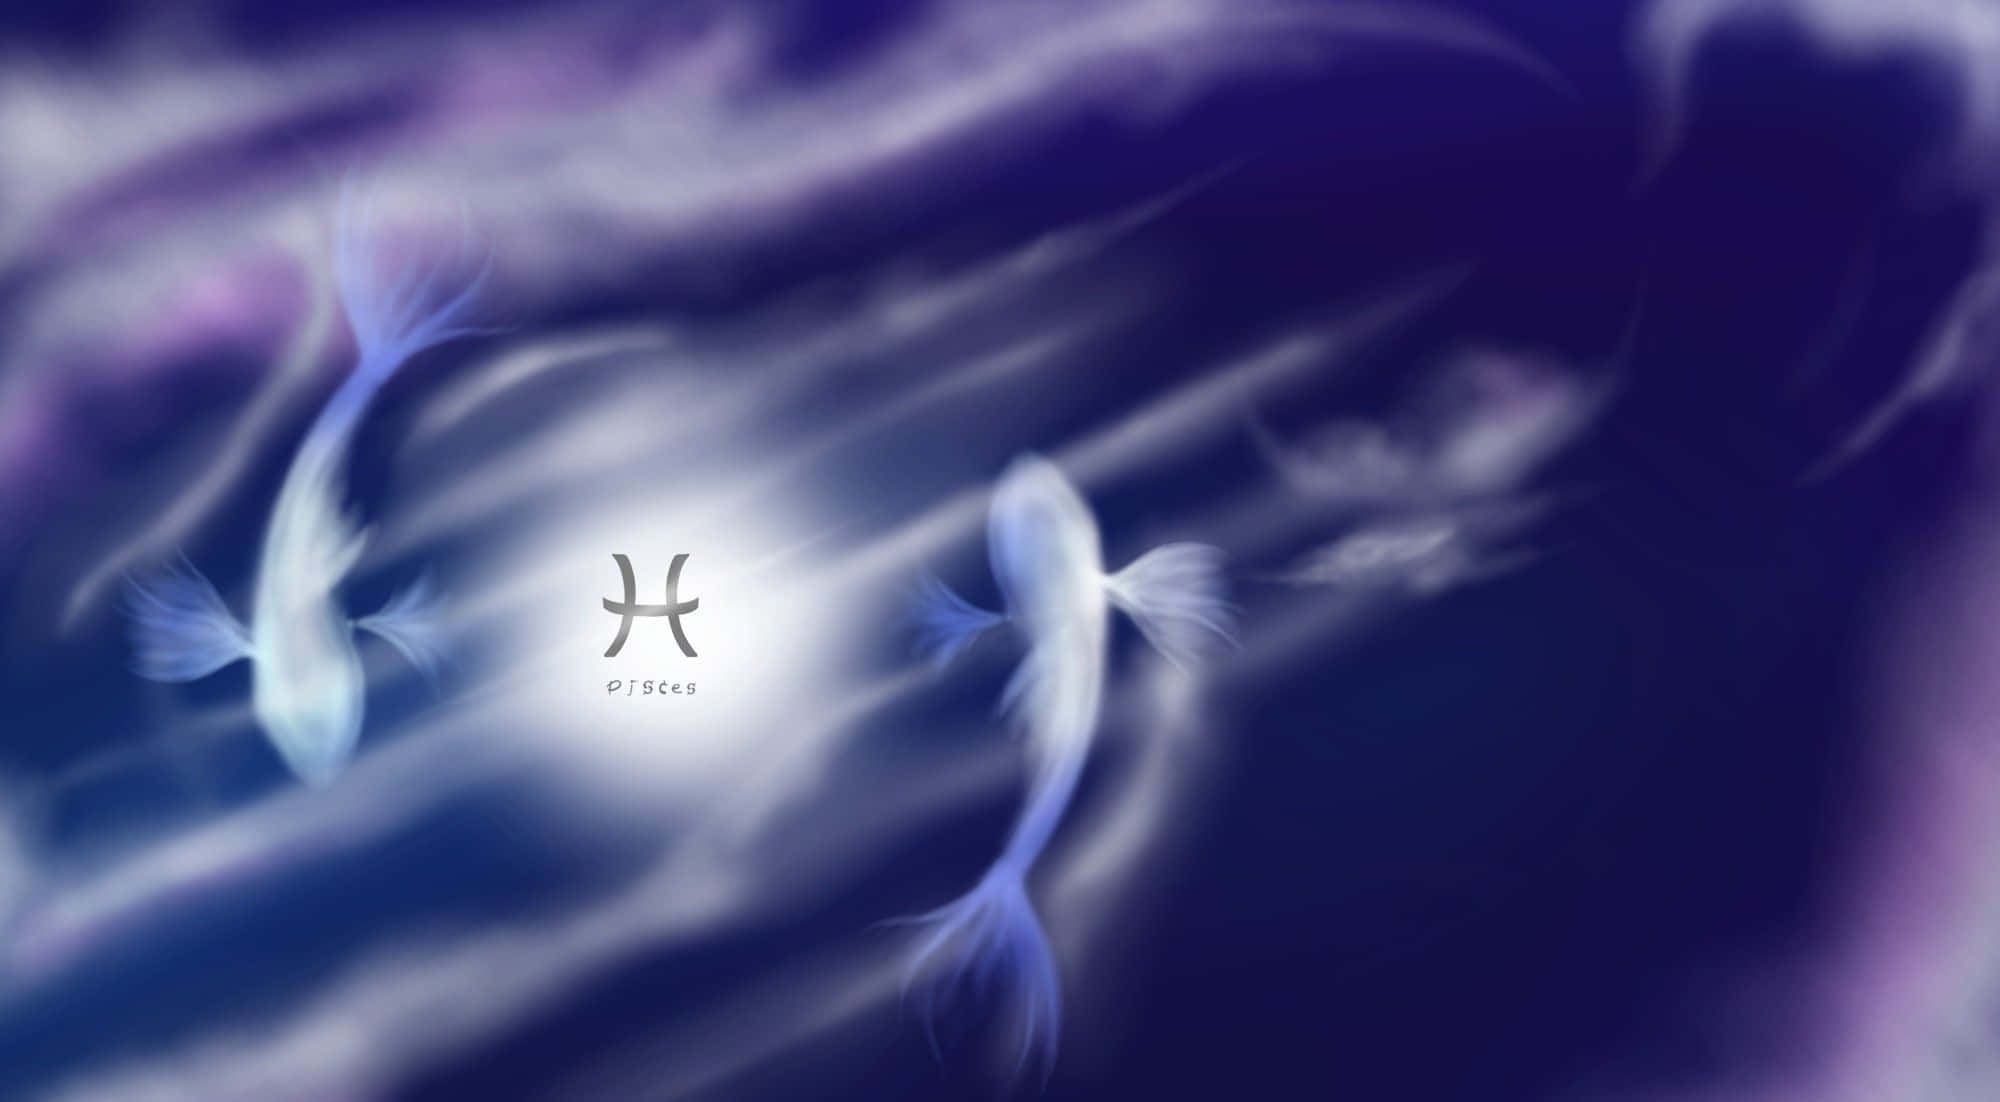 Celestial Beauty: Artistic Impression of the Pisces Zodiac Sign